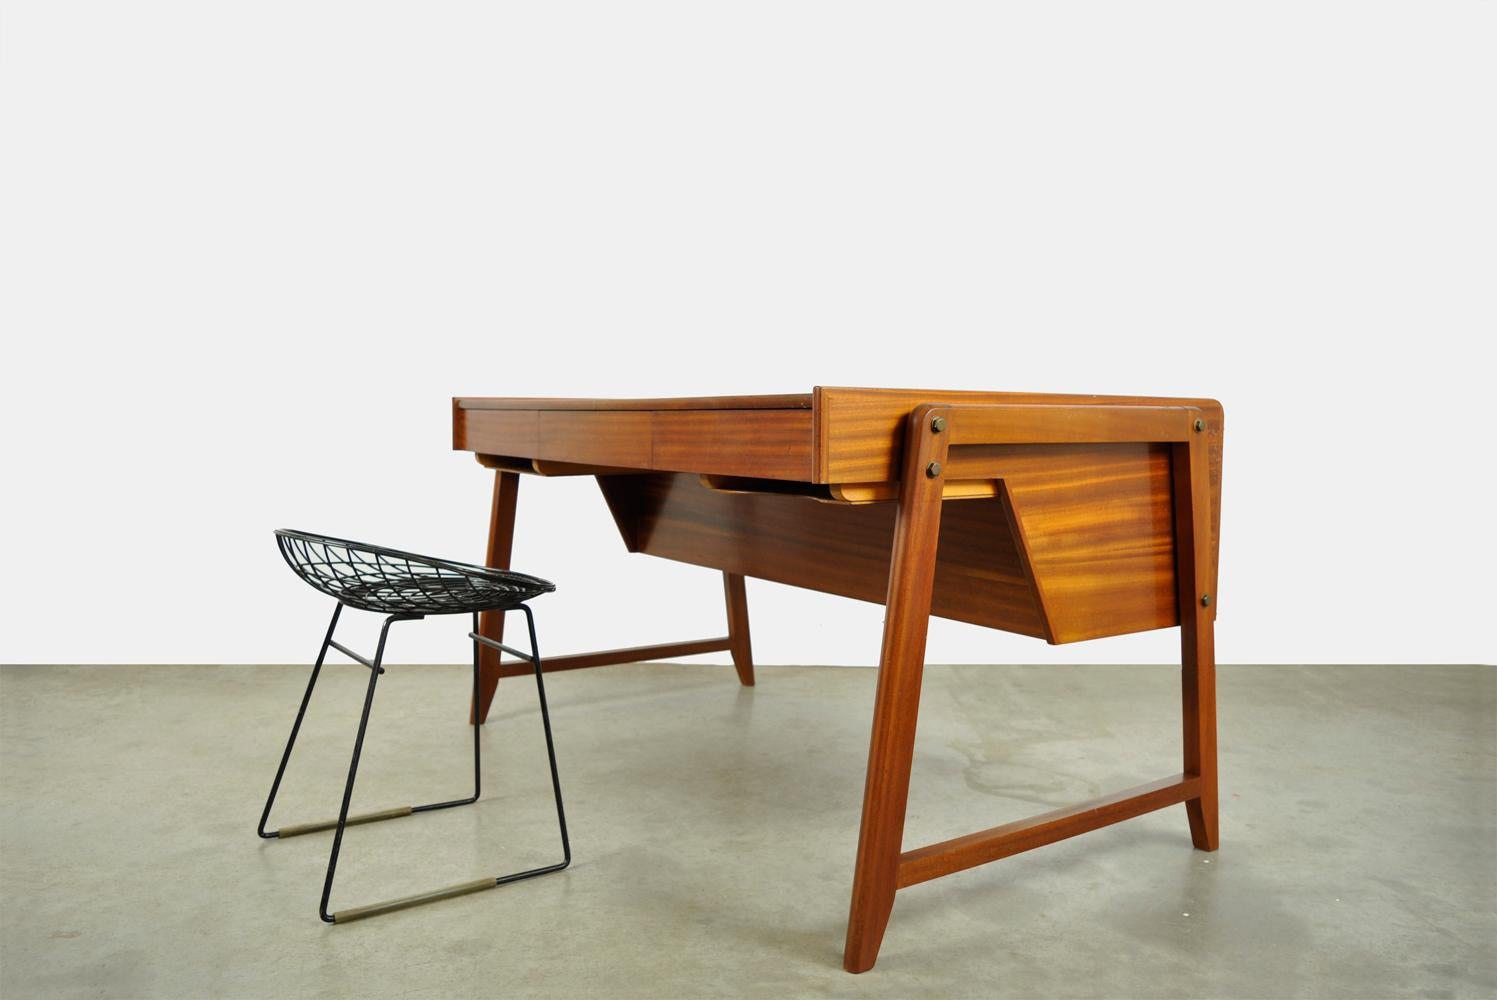 Unique and beautiful wooden design architectural firm, designed by Clausen & Maerus and produced in the Netherlands by Eden in the 1960s. 
The large desk has 3 drawers at the front with two storage compartments underneath, and three deep